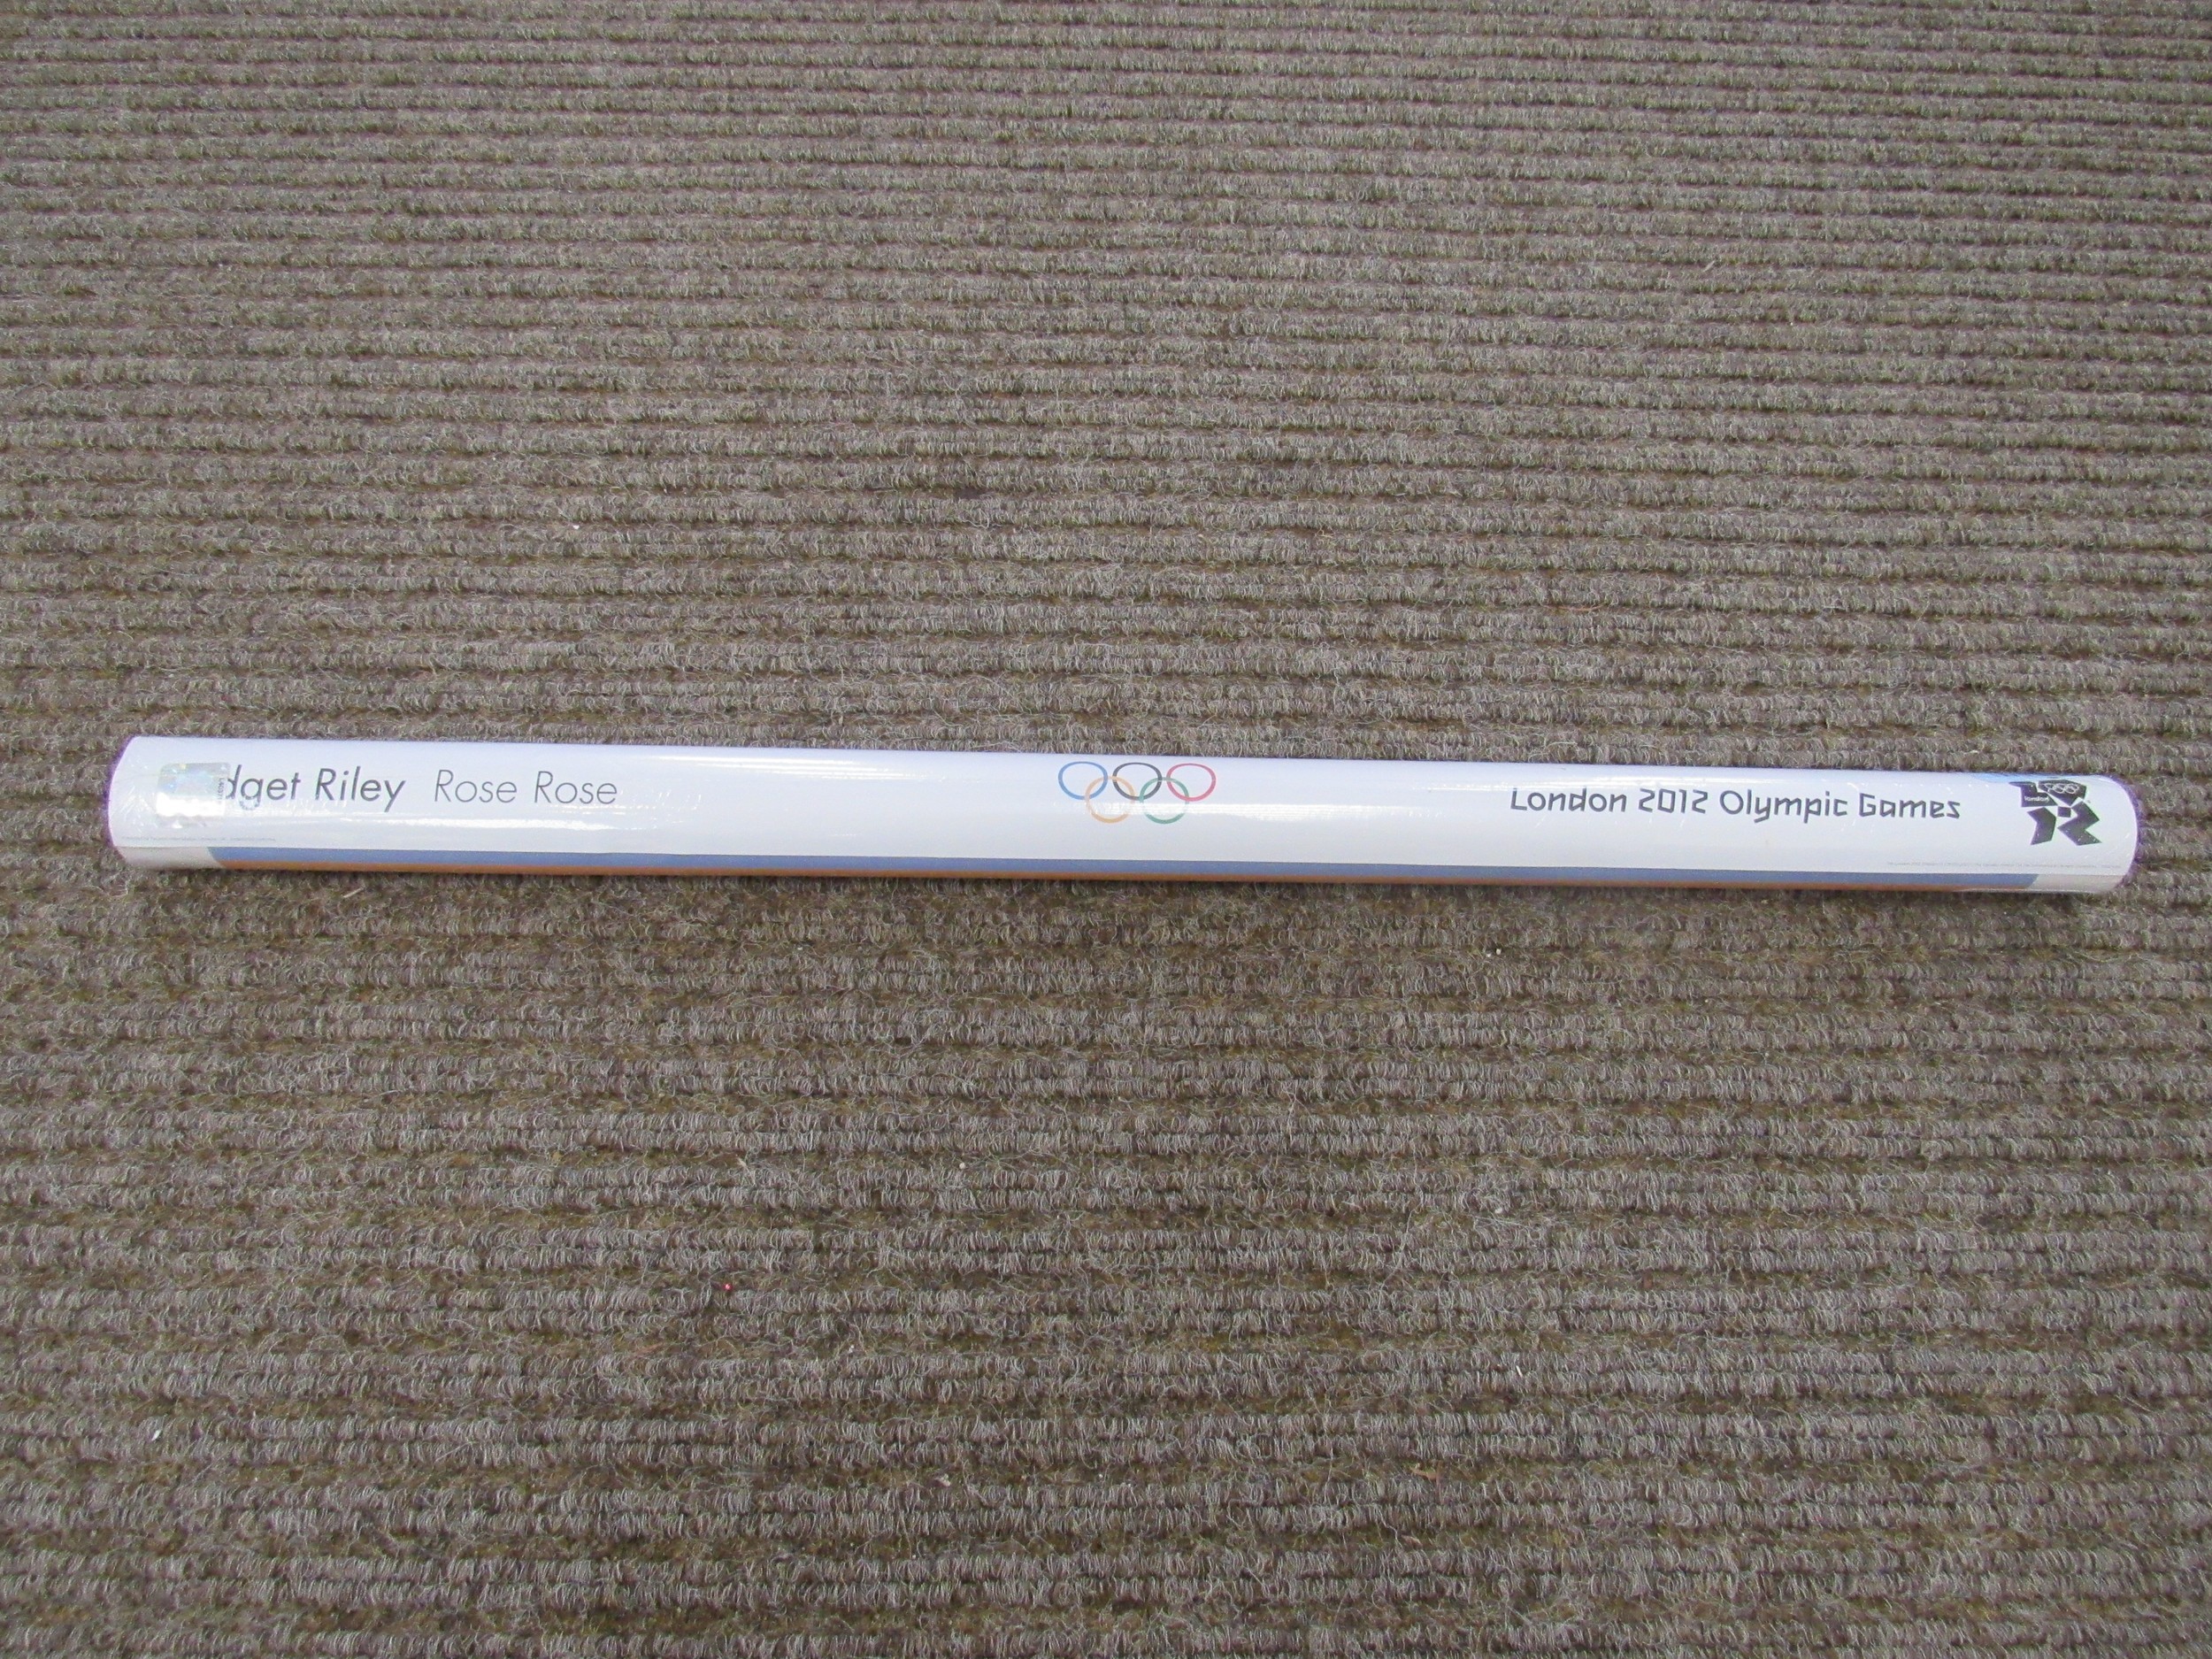 A London 2012 Olympic Poster, Bridget Riley 'Rose Rose' official off set lithograph, still sealed in